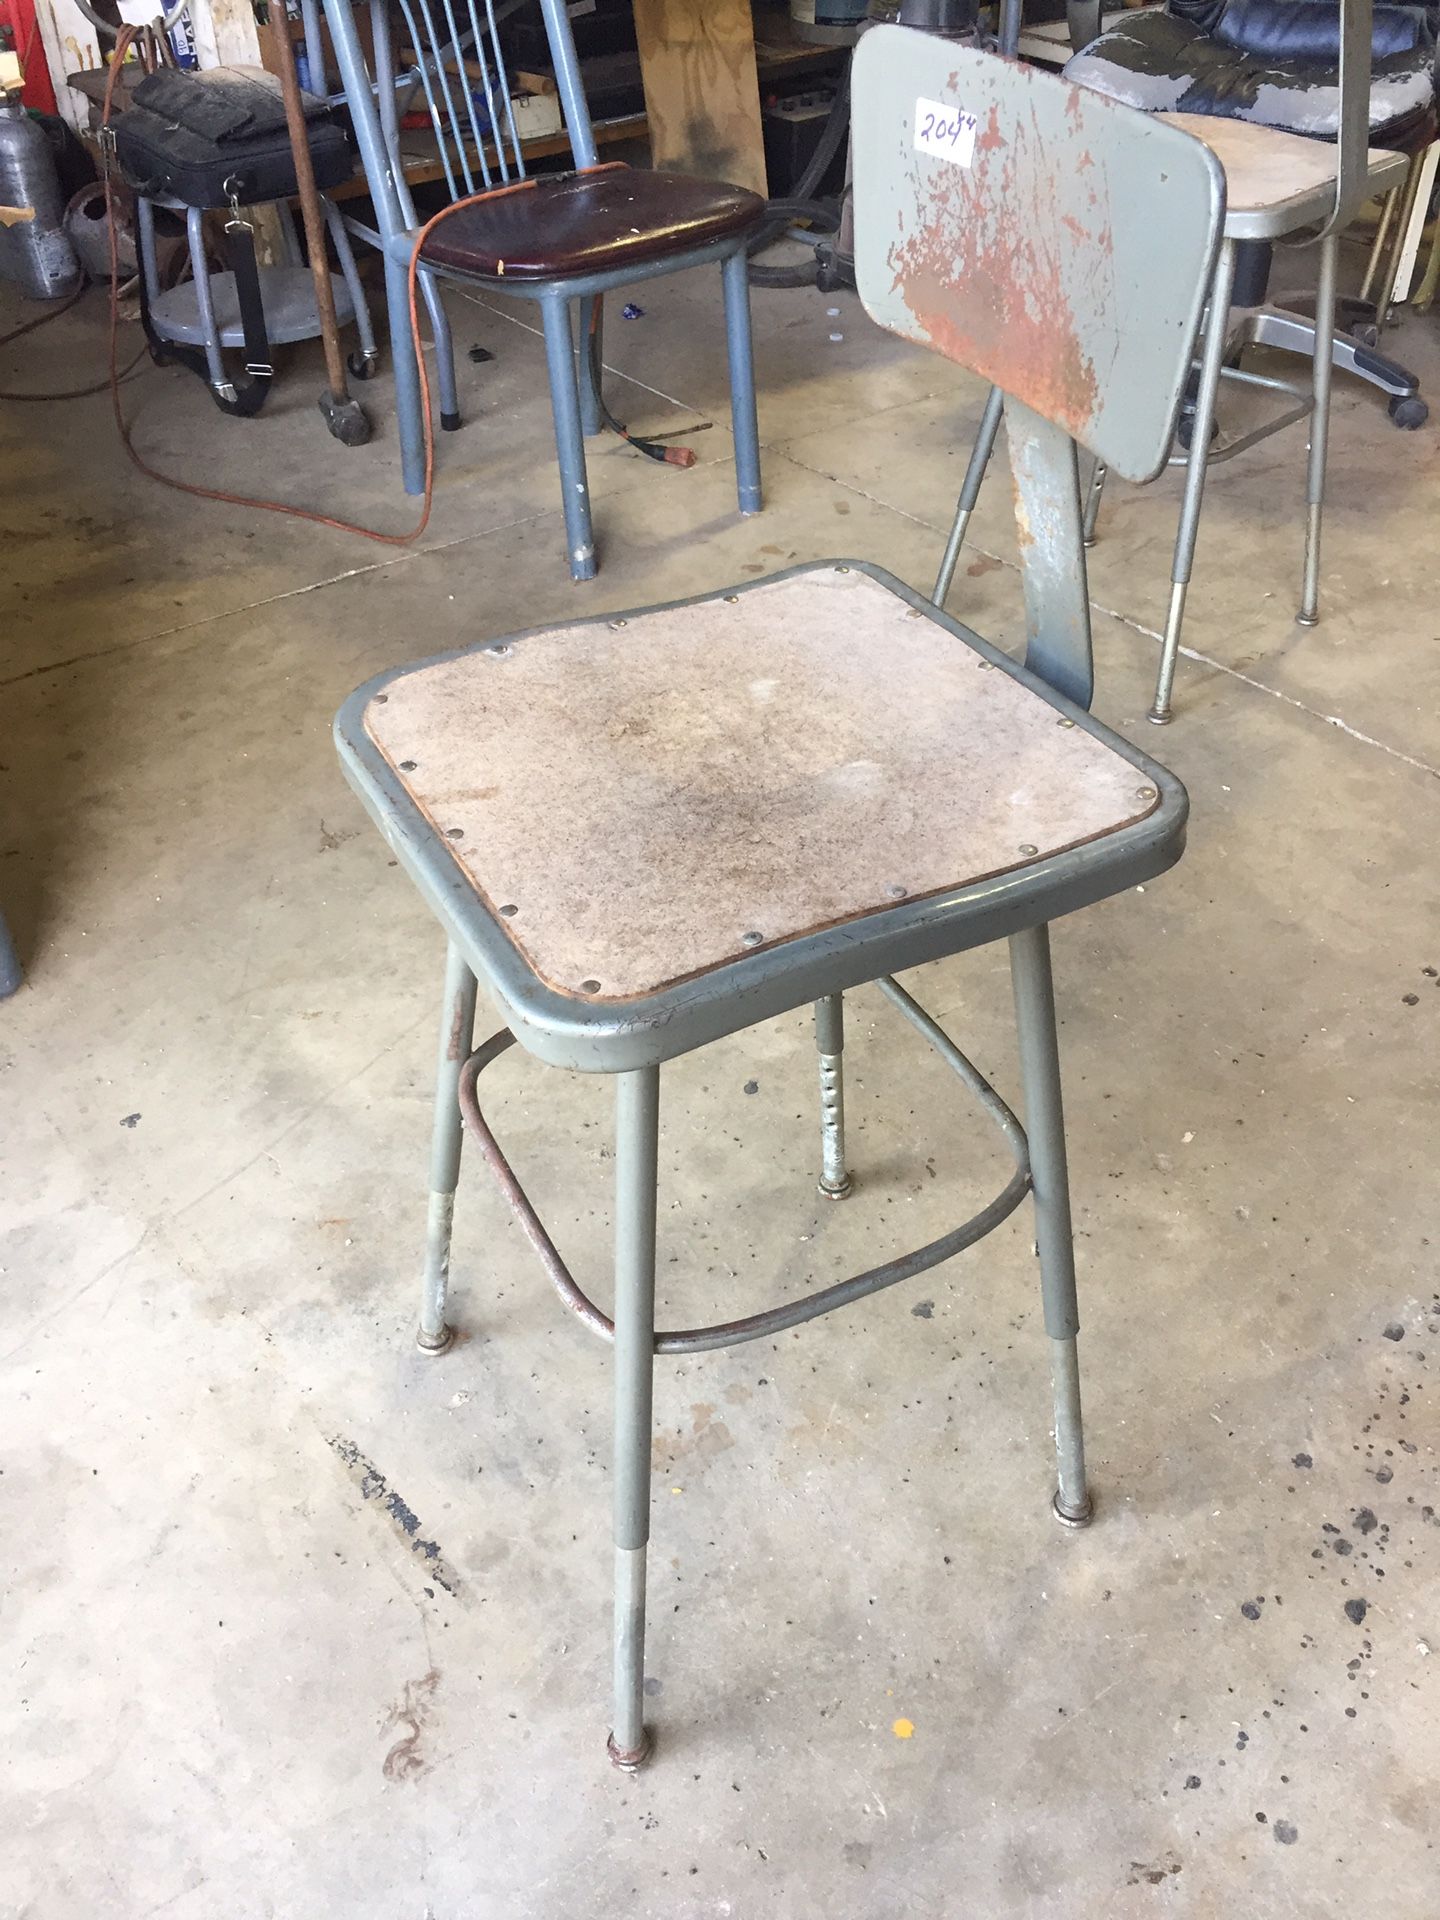 Stool for shop